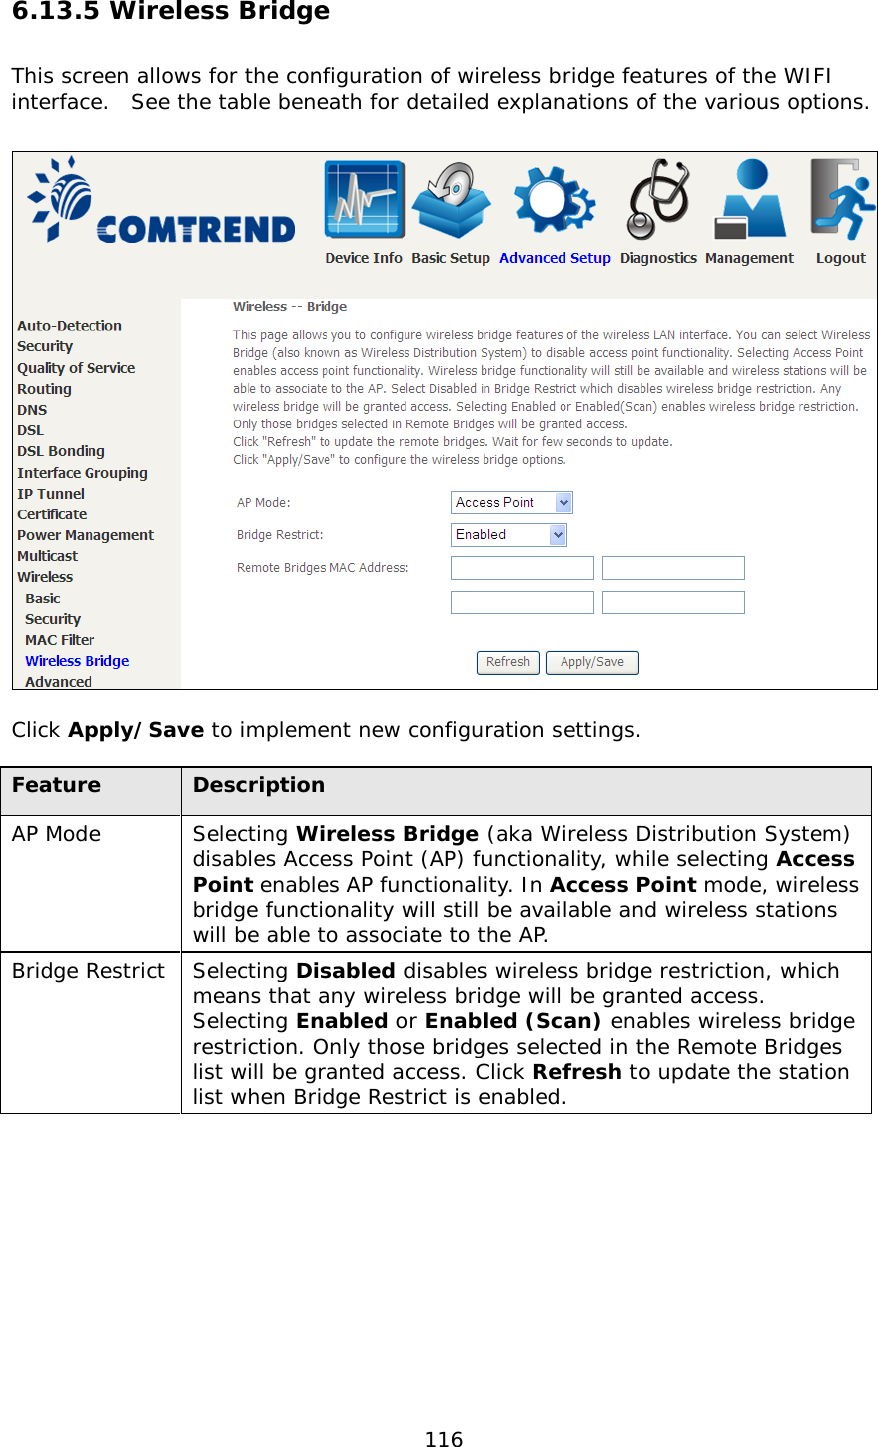  116 6.13.5 Wireless Bridge This screen allows for the configuration of wireless bridge features of the WIFI interface.  See the table beneath for detailed explanations of the various options.    Click Apply/Save to implement new configuration settings.   Feature Description AP Mode Selecting Wireless Bridge (aka Wireless Distribution System) disables Access Point (AP) functionality, while selecting Access Point enables AP functionality. In Access Point mode, wireless bridge functionality will still be available and wireless stations will be able to associate to the AP.   Bridge Restrict Selecting Disabled disables wireless bridge restriction, which means that any wireless bridge will be granted access.  Selecting Enabled or Enabled (Scan) enables wireless bridge restriction. Only those bridges selected in the Remote Bridges list will be granted access. Click Refresh to update the station list when Bridge Restrict is enabled.  